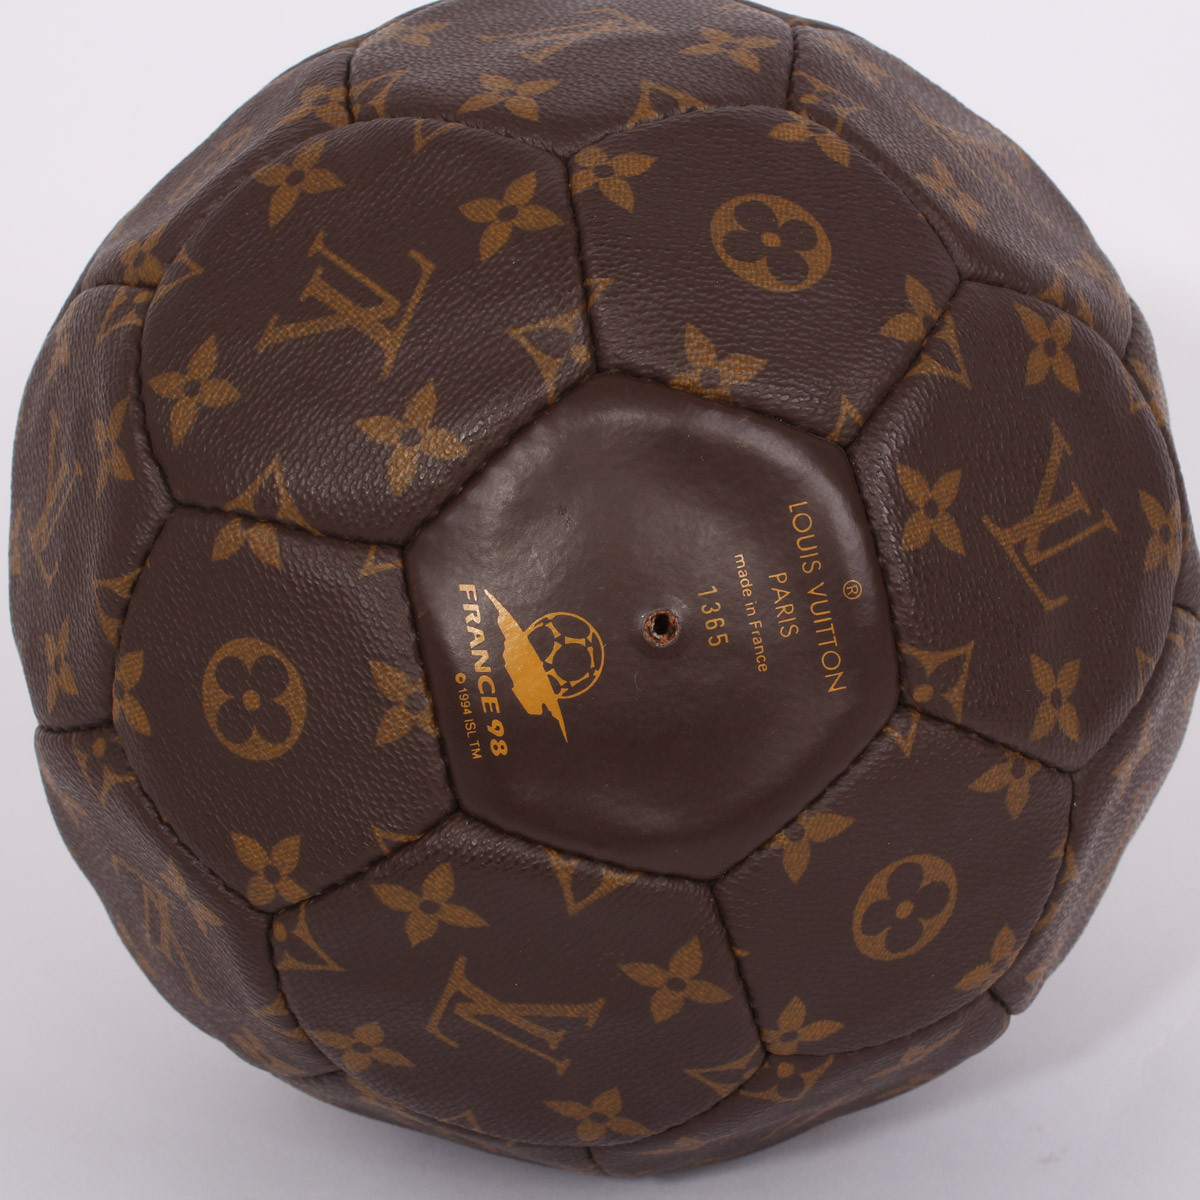 Louis Vuitton Limited Edition Soccer Ball World Cup 1998 at